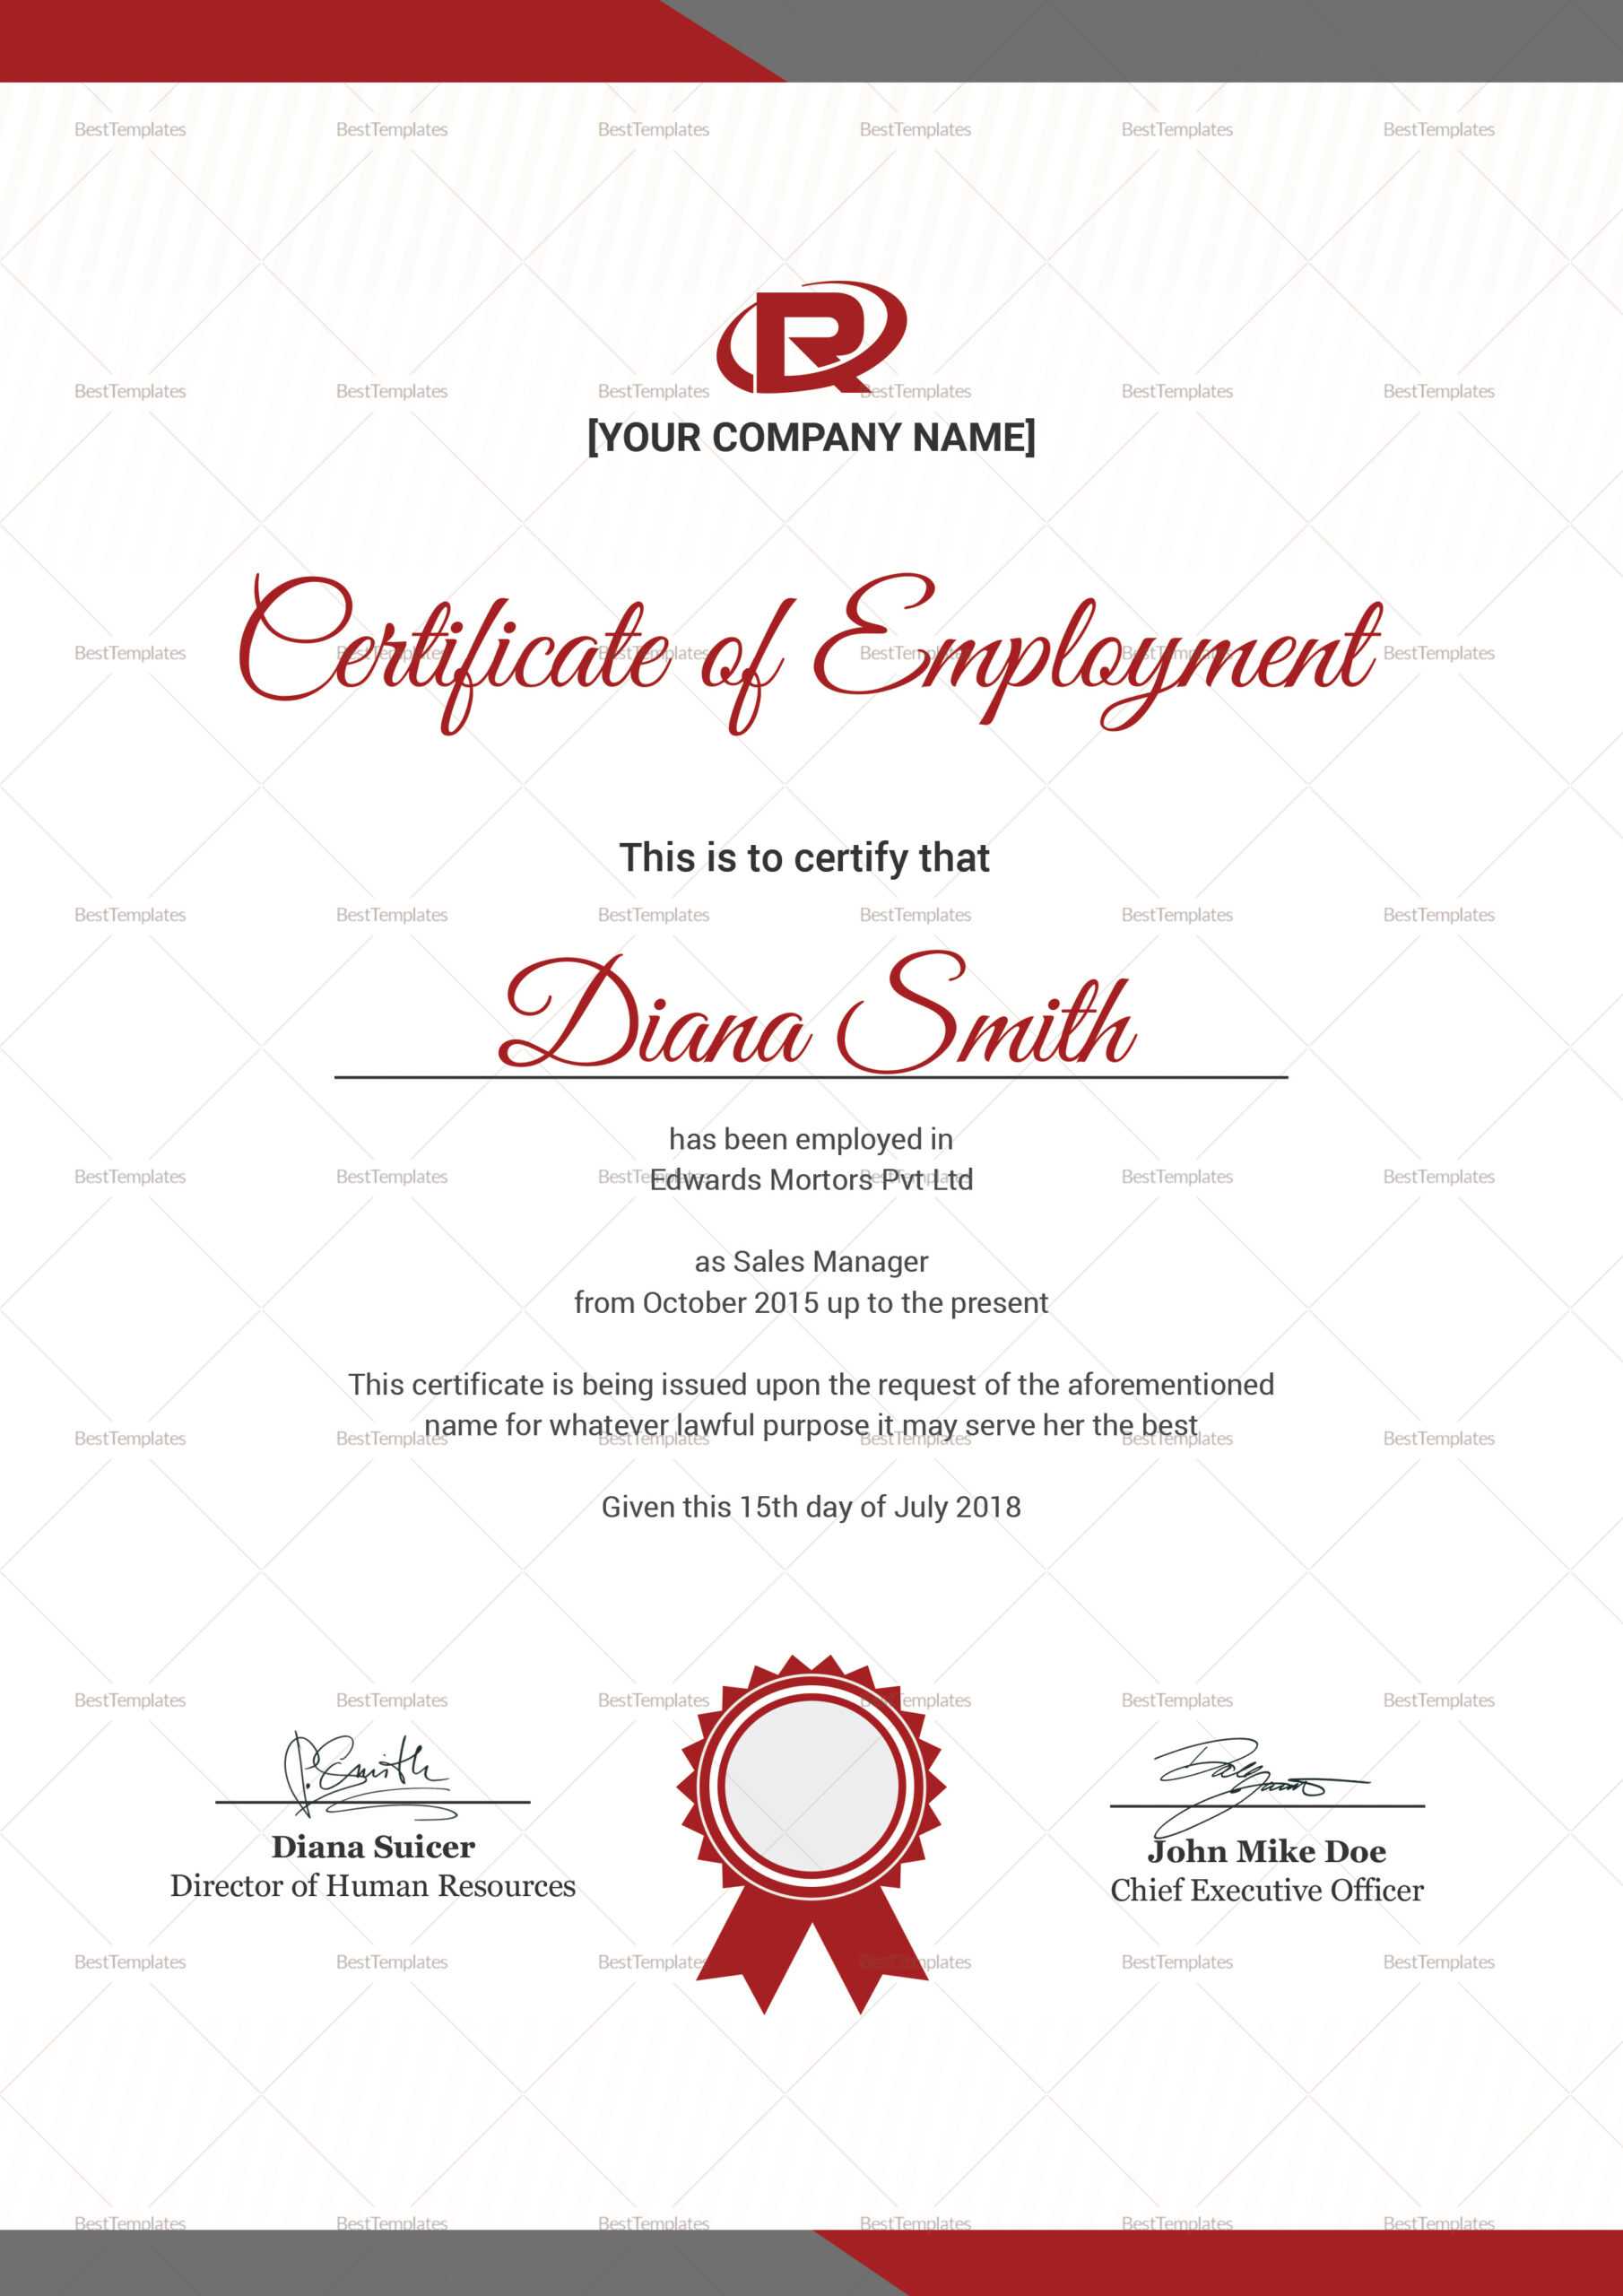 Productive Employment Certificate Template For Certificate Of Employment Template